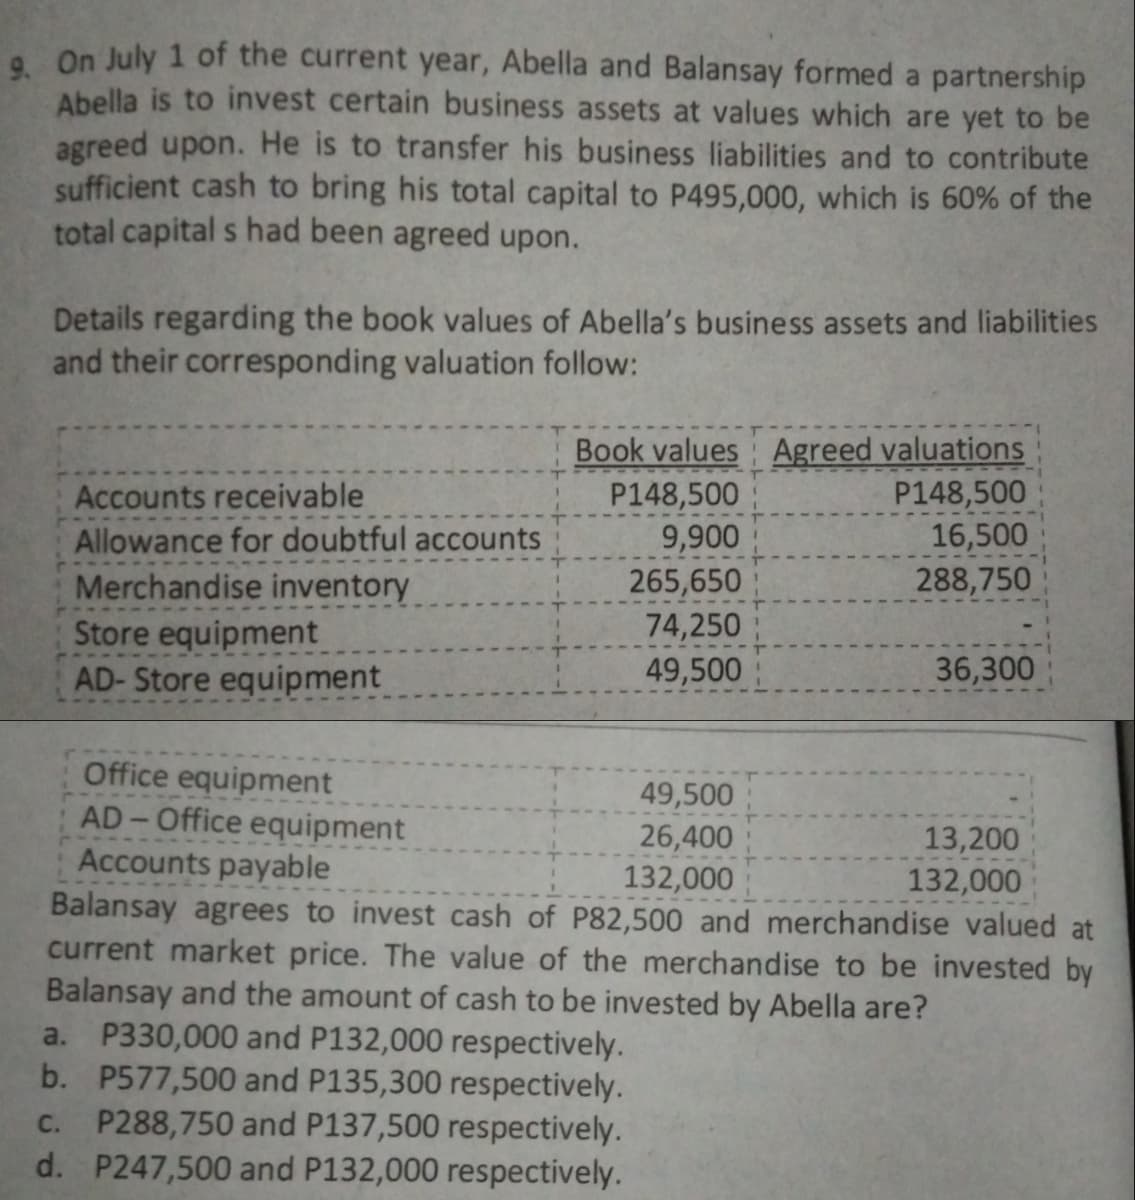 . On July 1 of the current year, Abella and Balansay formed a partnership
Abella is to invest certain business assets at values which are yet to be
agreed upon. He is to transfer his business liabilities and to contribute
sufficient cash to bring his total capital to P495,000, which is 60% of the
total capital s had been agreed upon.
Details regarding the book values of Abella's business assets and liabilities
and their corresponding valuation follow:
Book values Agreed valuations
P148,500
16,500
288,750
P148,500
9,900
Accounts receivable
Allowance for doubtful accounts
Merchandise inventory
Store equipment
AD- Store equipment
265,650
74,250
49,500
36,300
Office equipment
AD-Office equipment
Accounts payable
49,500
26,400
132,000
13,200
132,000
Balansay agrees to invest cash of P82,500 and merchandise valued at
current market price. The value of the merchandise to be invested by
Balansay and the amount of cash to be invested by Abella are?
a. P330,000 and P132,000 respectively.
b. P577,500 and P135,300 respectively.
P288,750 and P137,500 respectively.
d. P247,500 and P132,000 respectively.
C.
